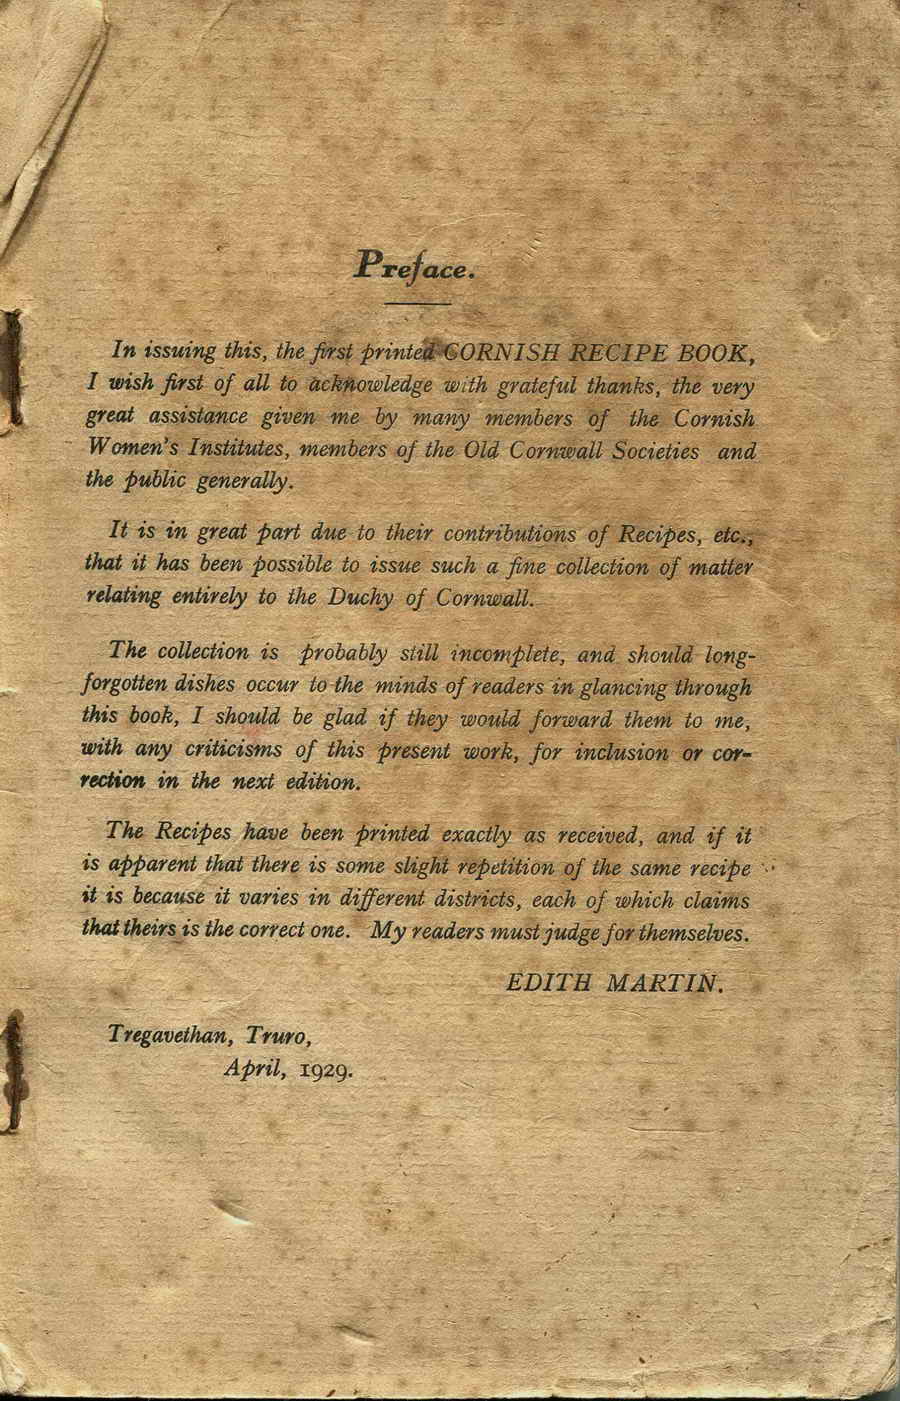 Preface to the 1929 first printed Cornish recipe book